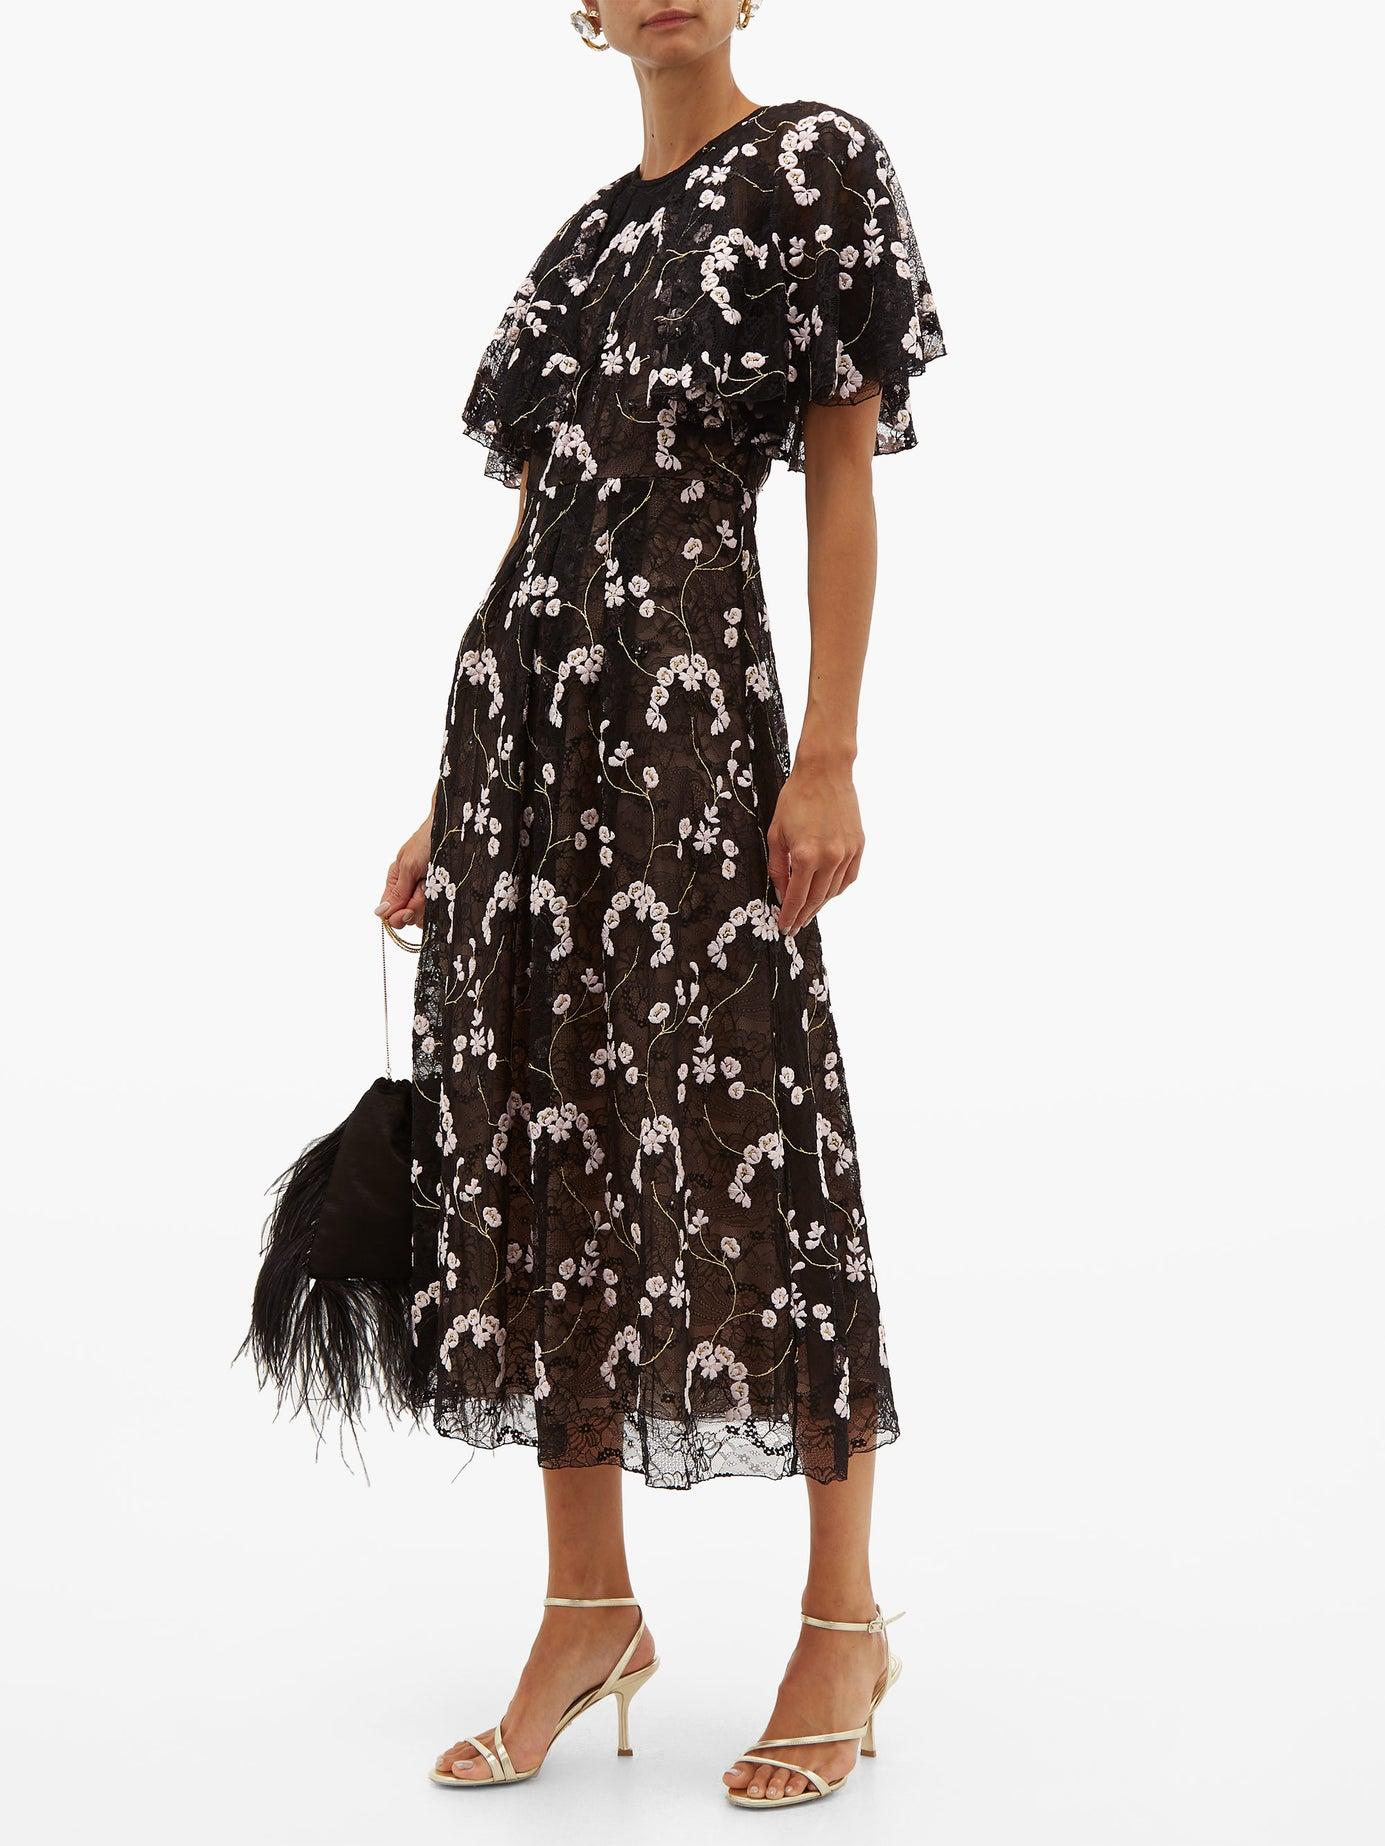 Giambattista Valli Floral-embroidered Chantilly-lace Dress in Black - Lyst